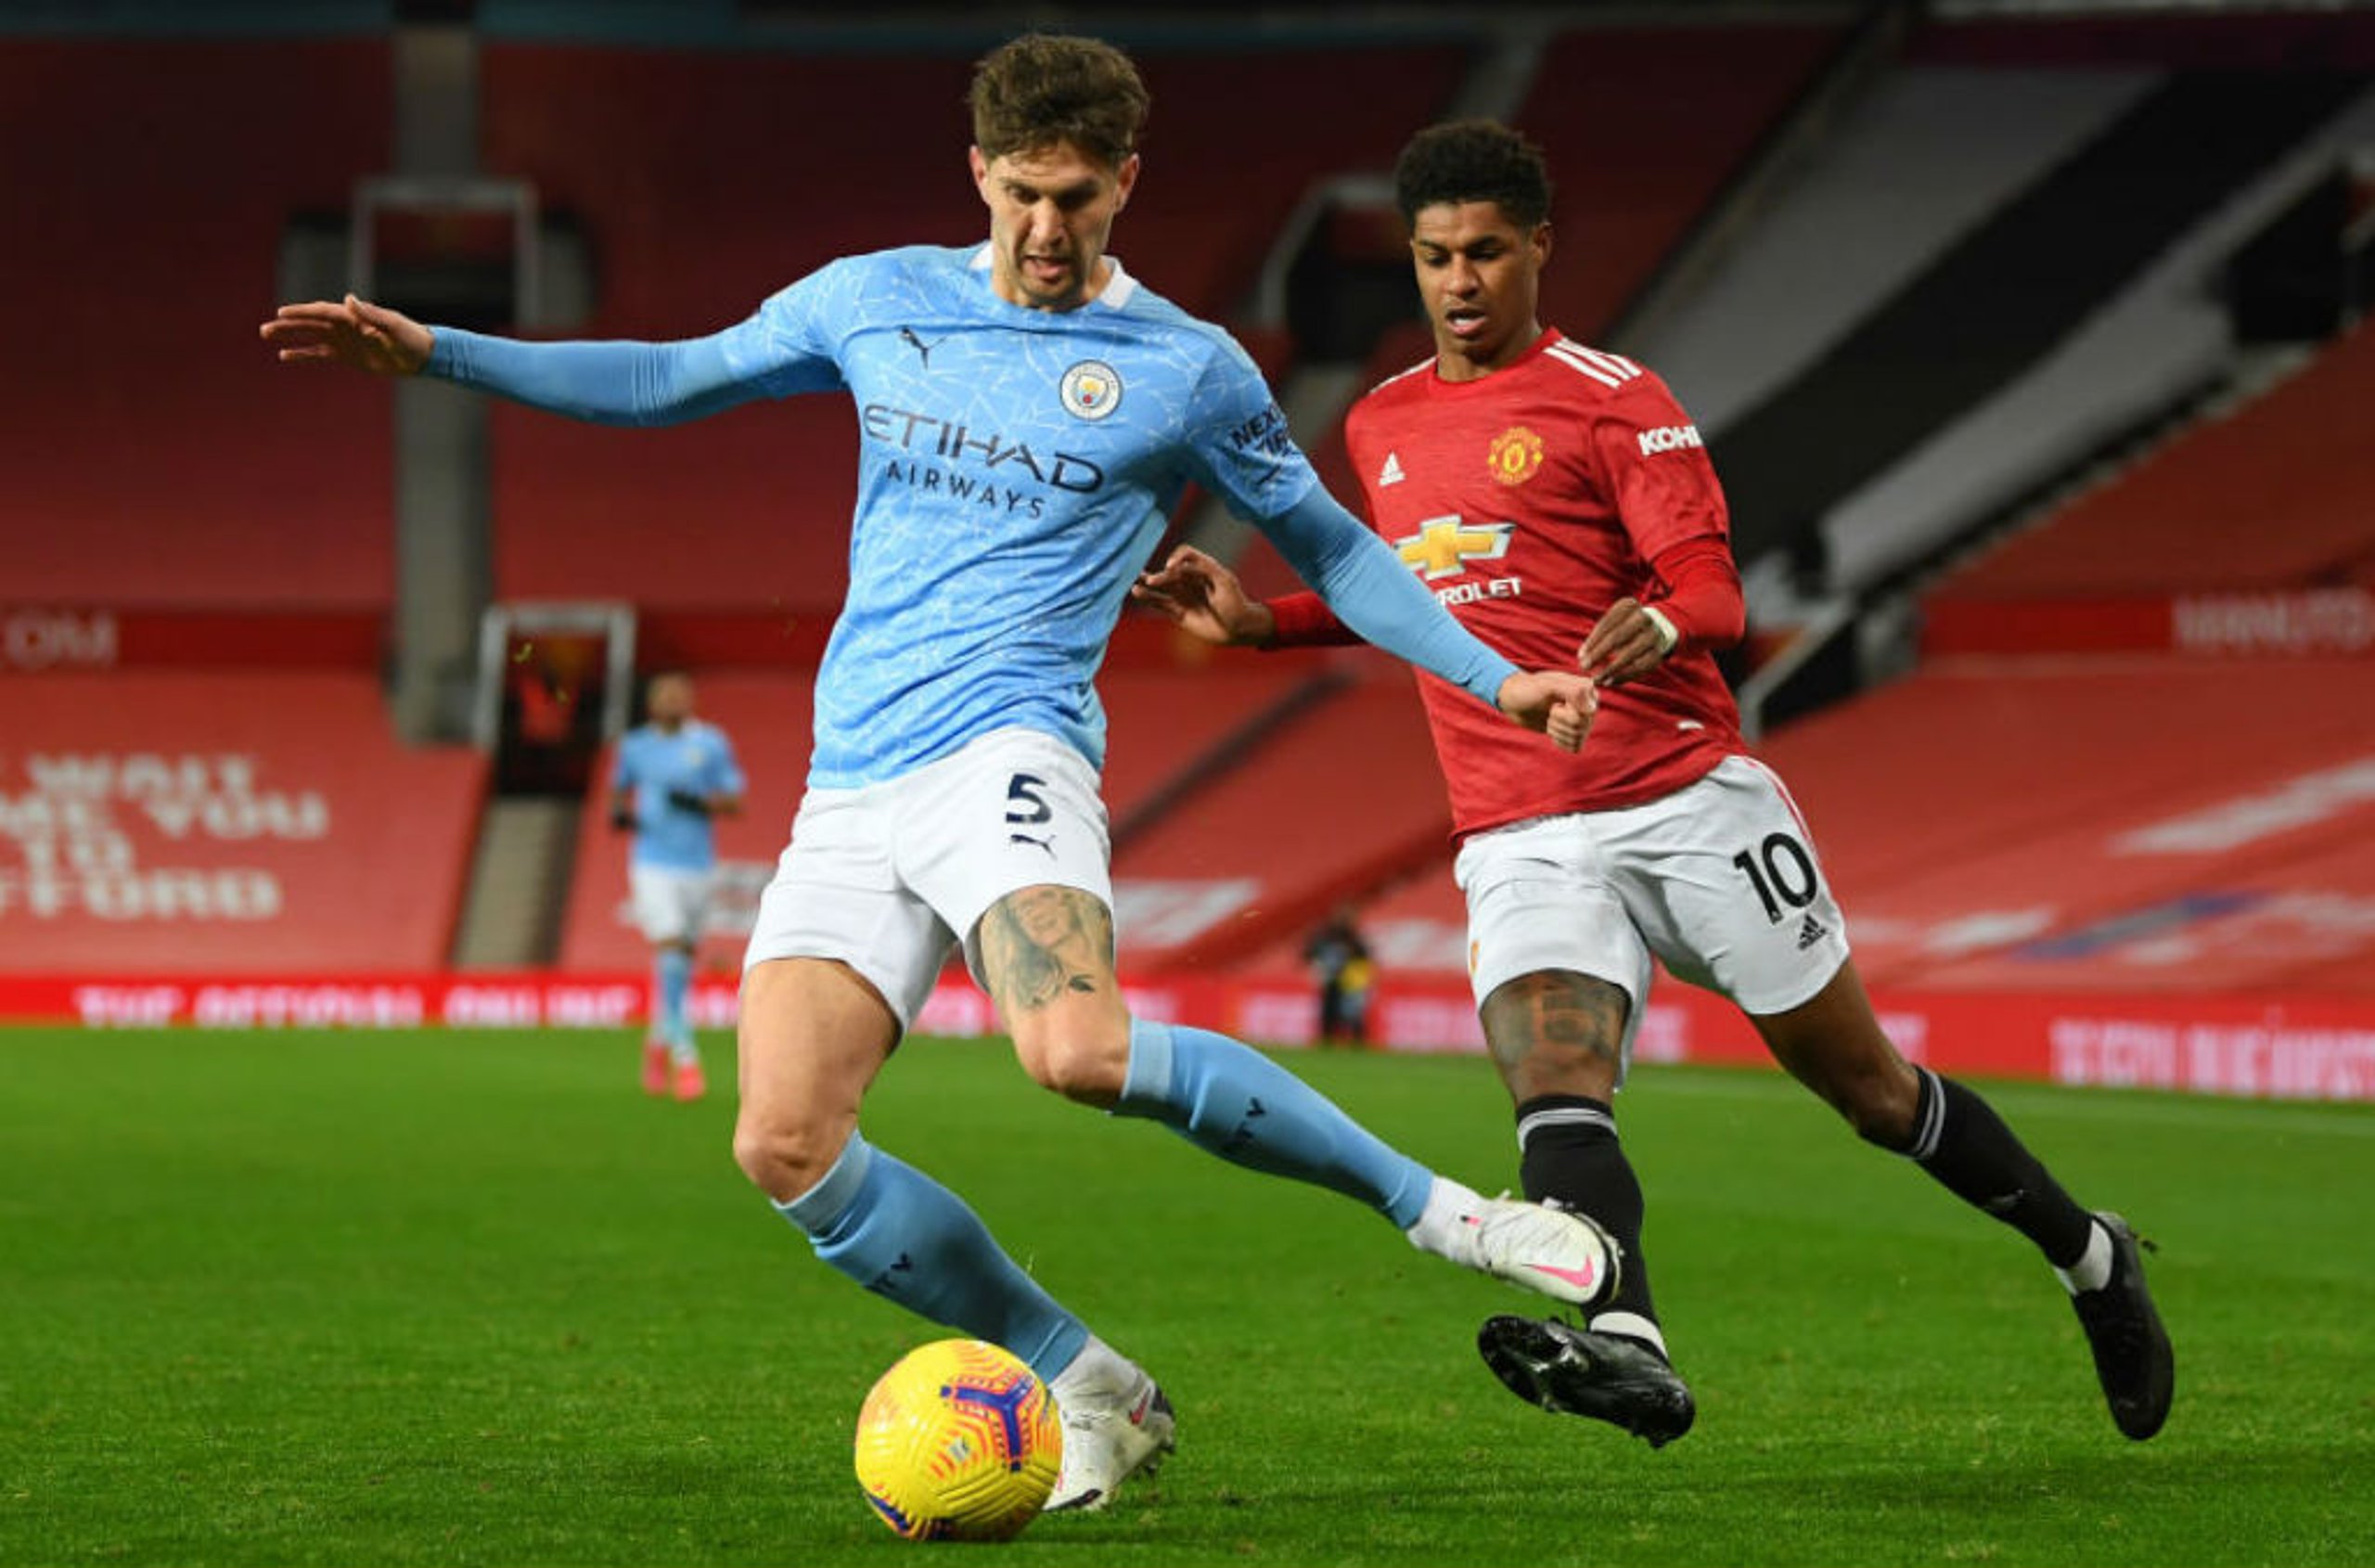 CENTRE OF ATTENTION: John Stones snuffs out the threat of Marcus Rashford